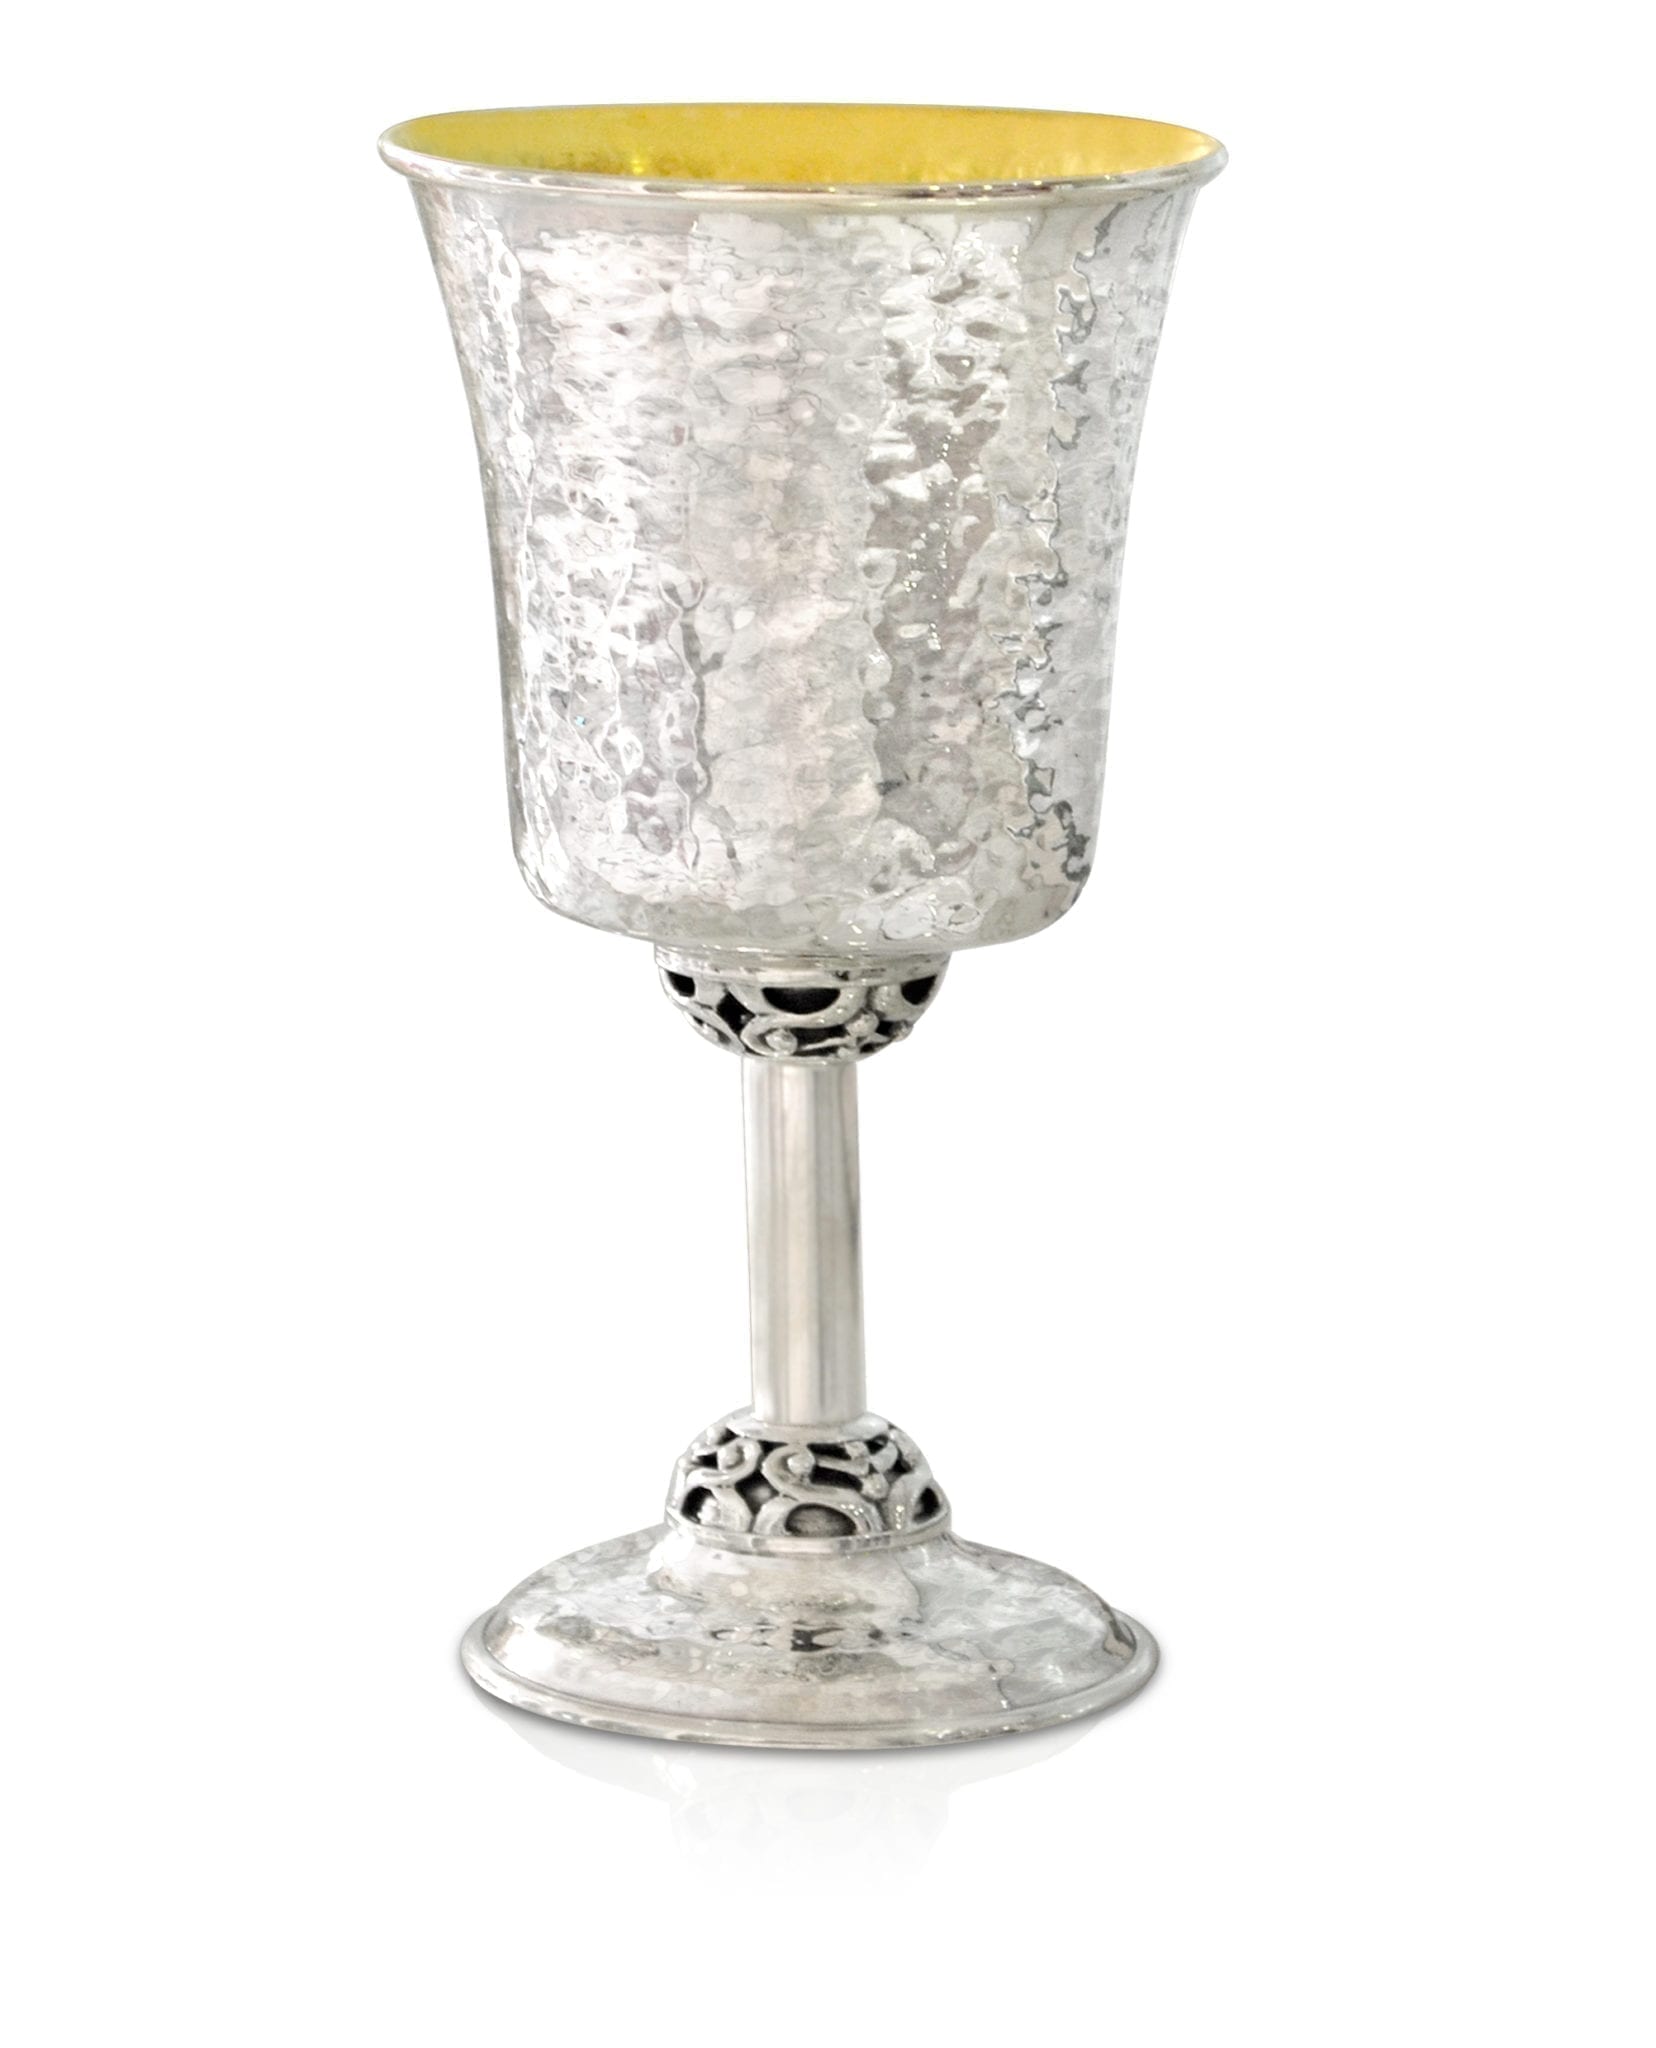 Hammered Silver Kiddush Cup with Stem